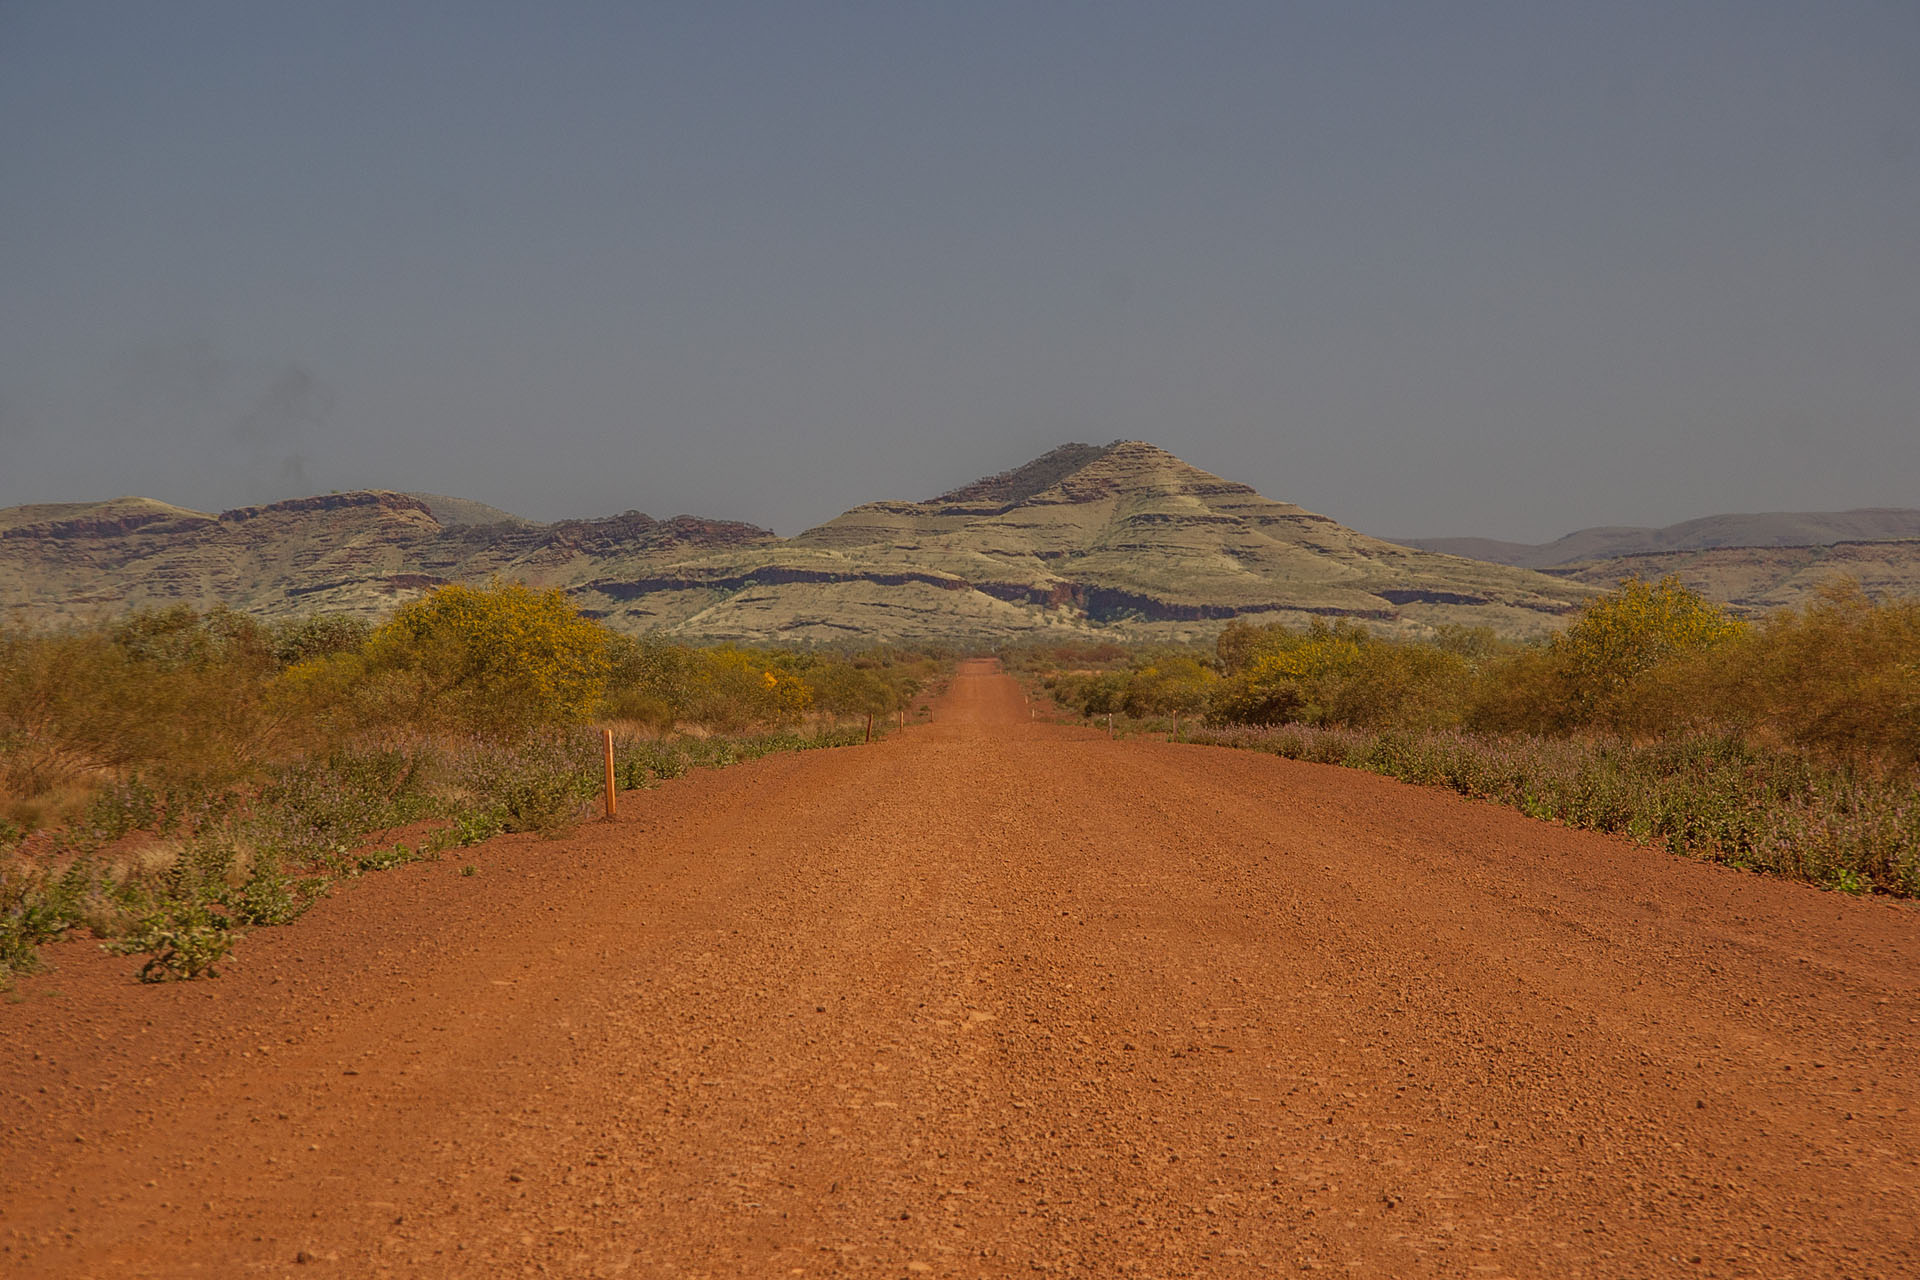 Dirt road and hills, and more bushfire.